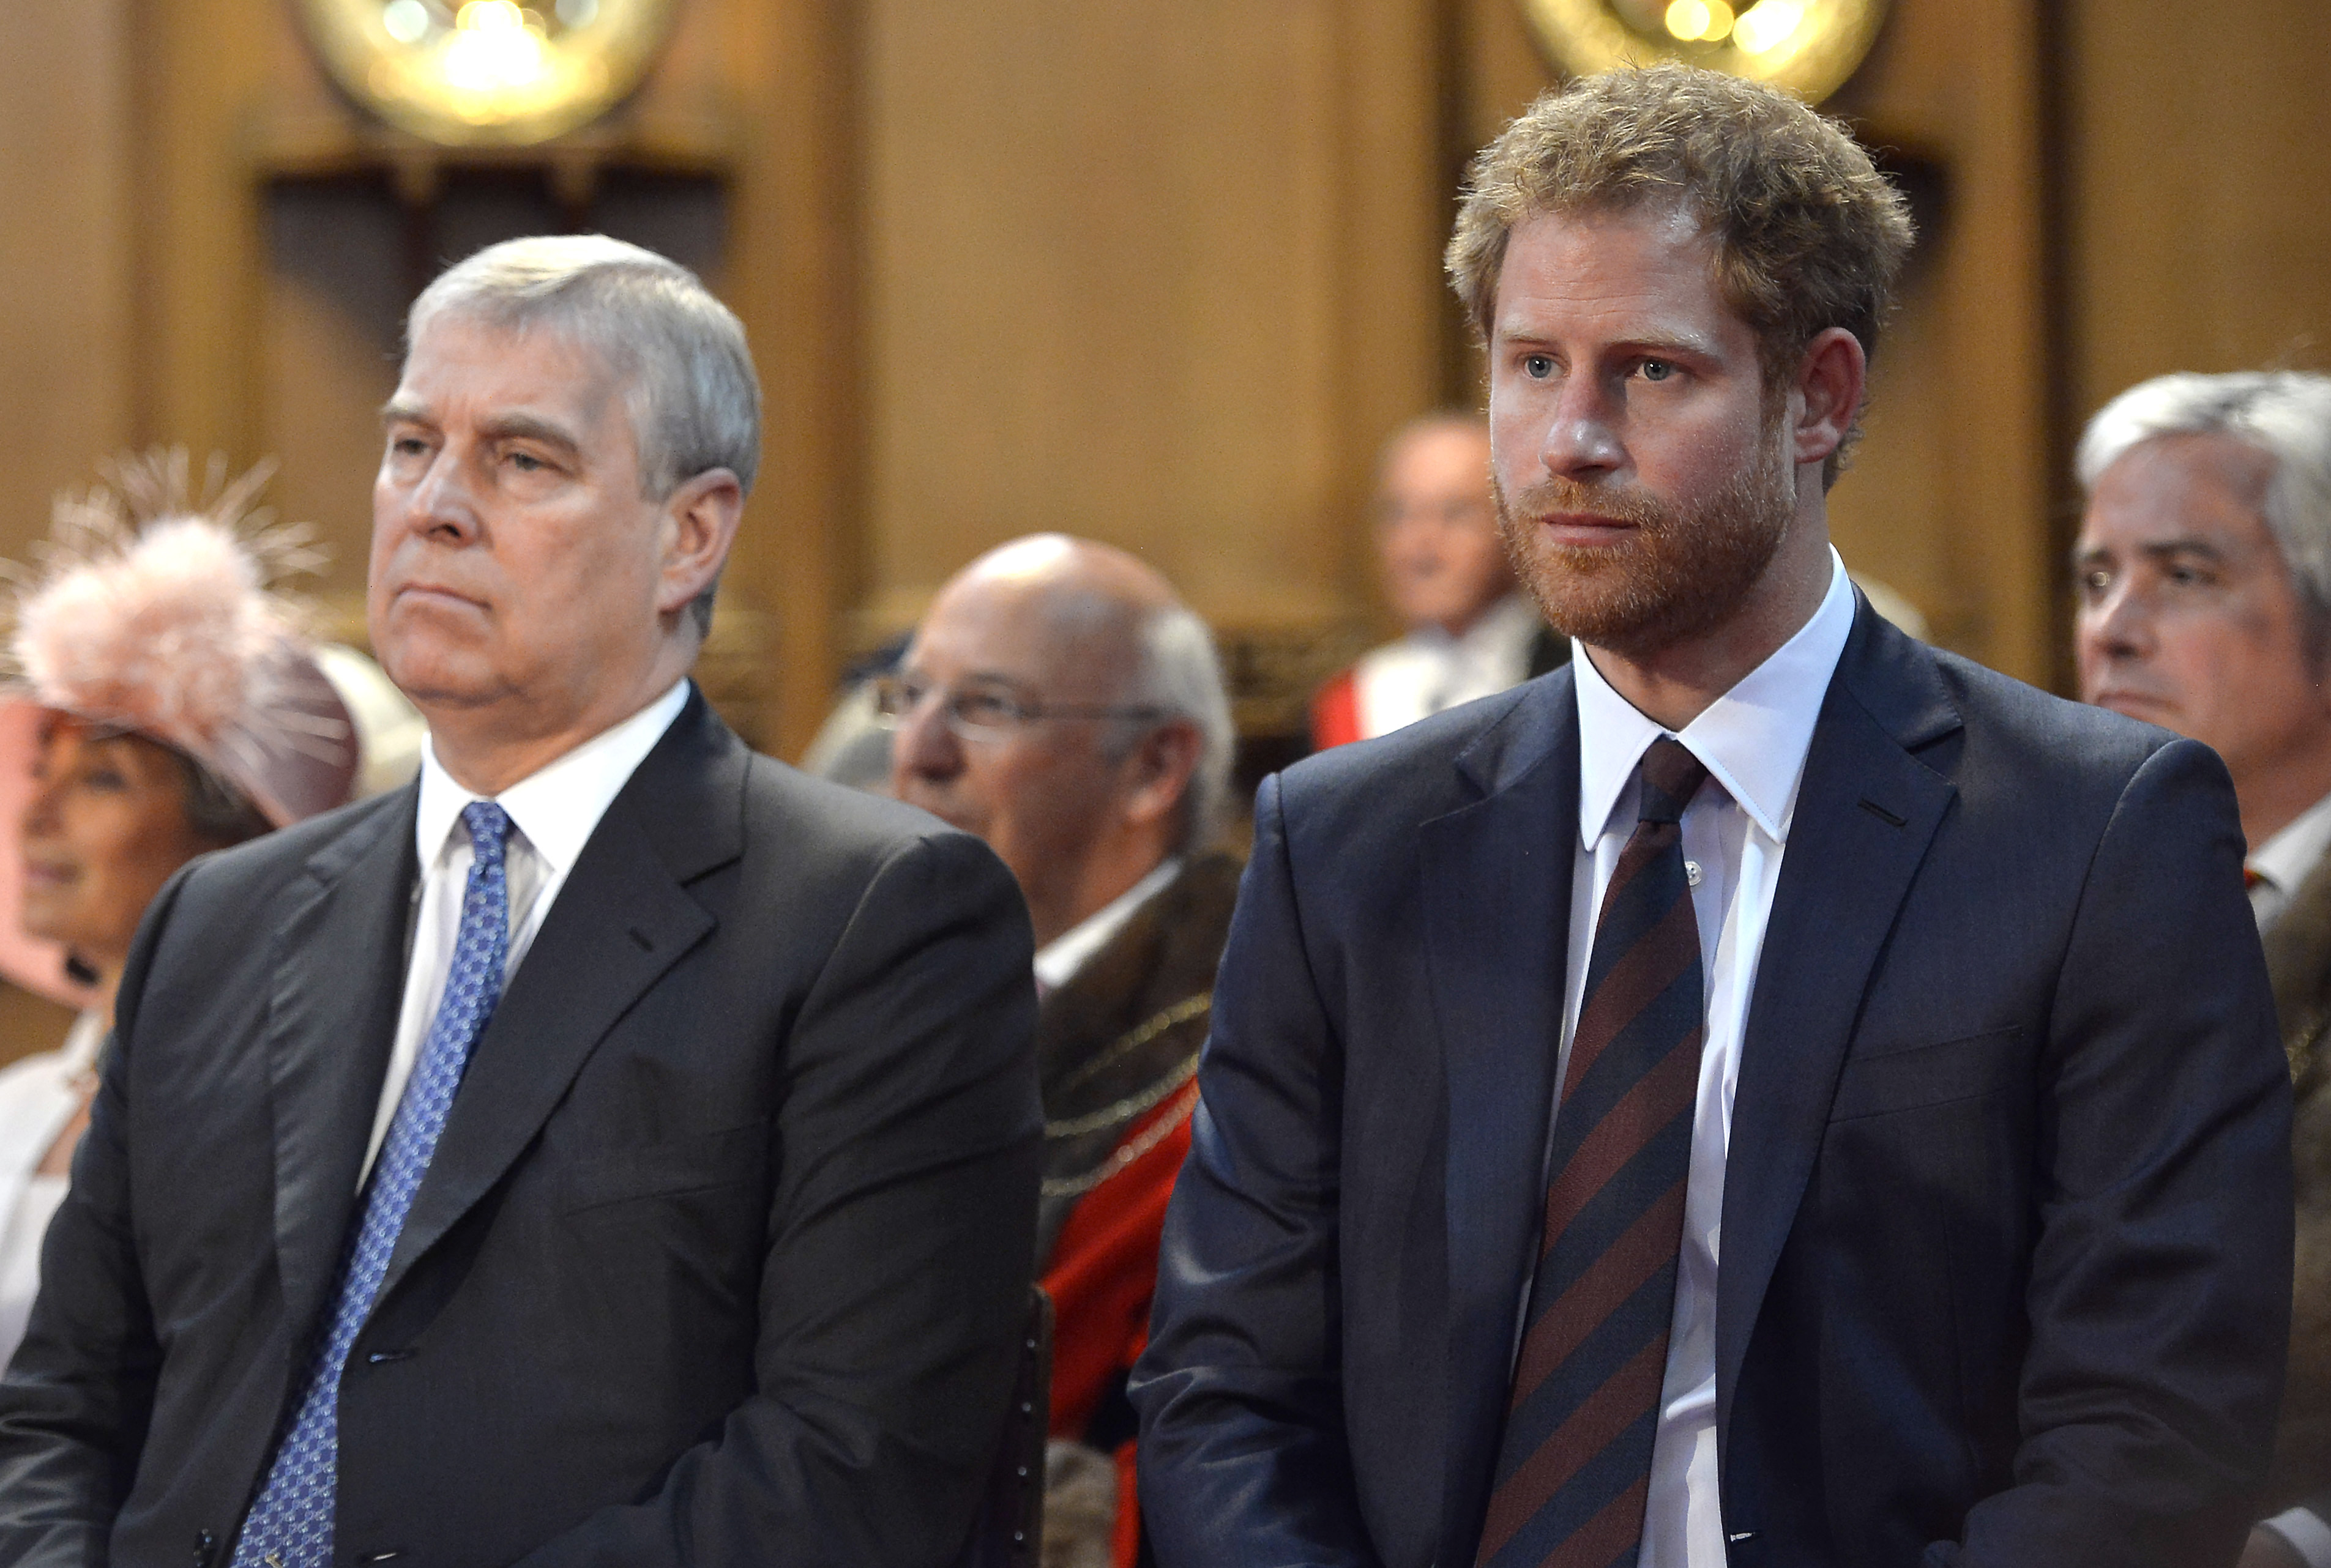 Prince Andrew and Prince Harry sitting next to each other during a reception at the Guildhall